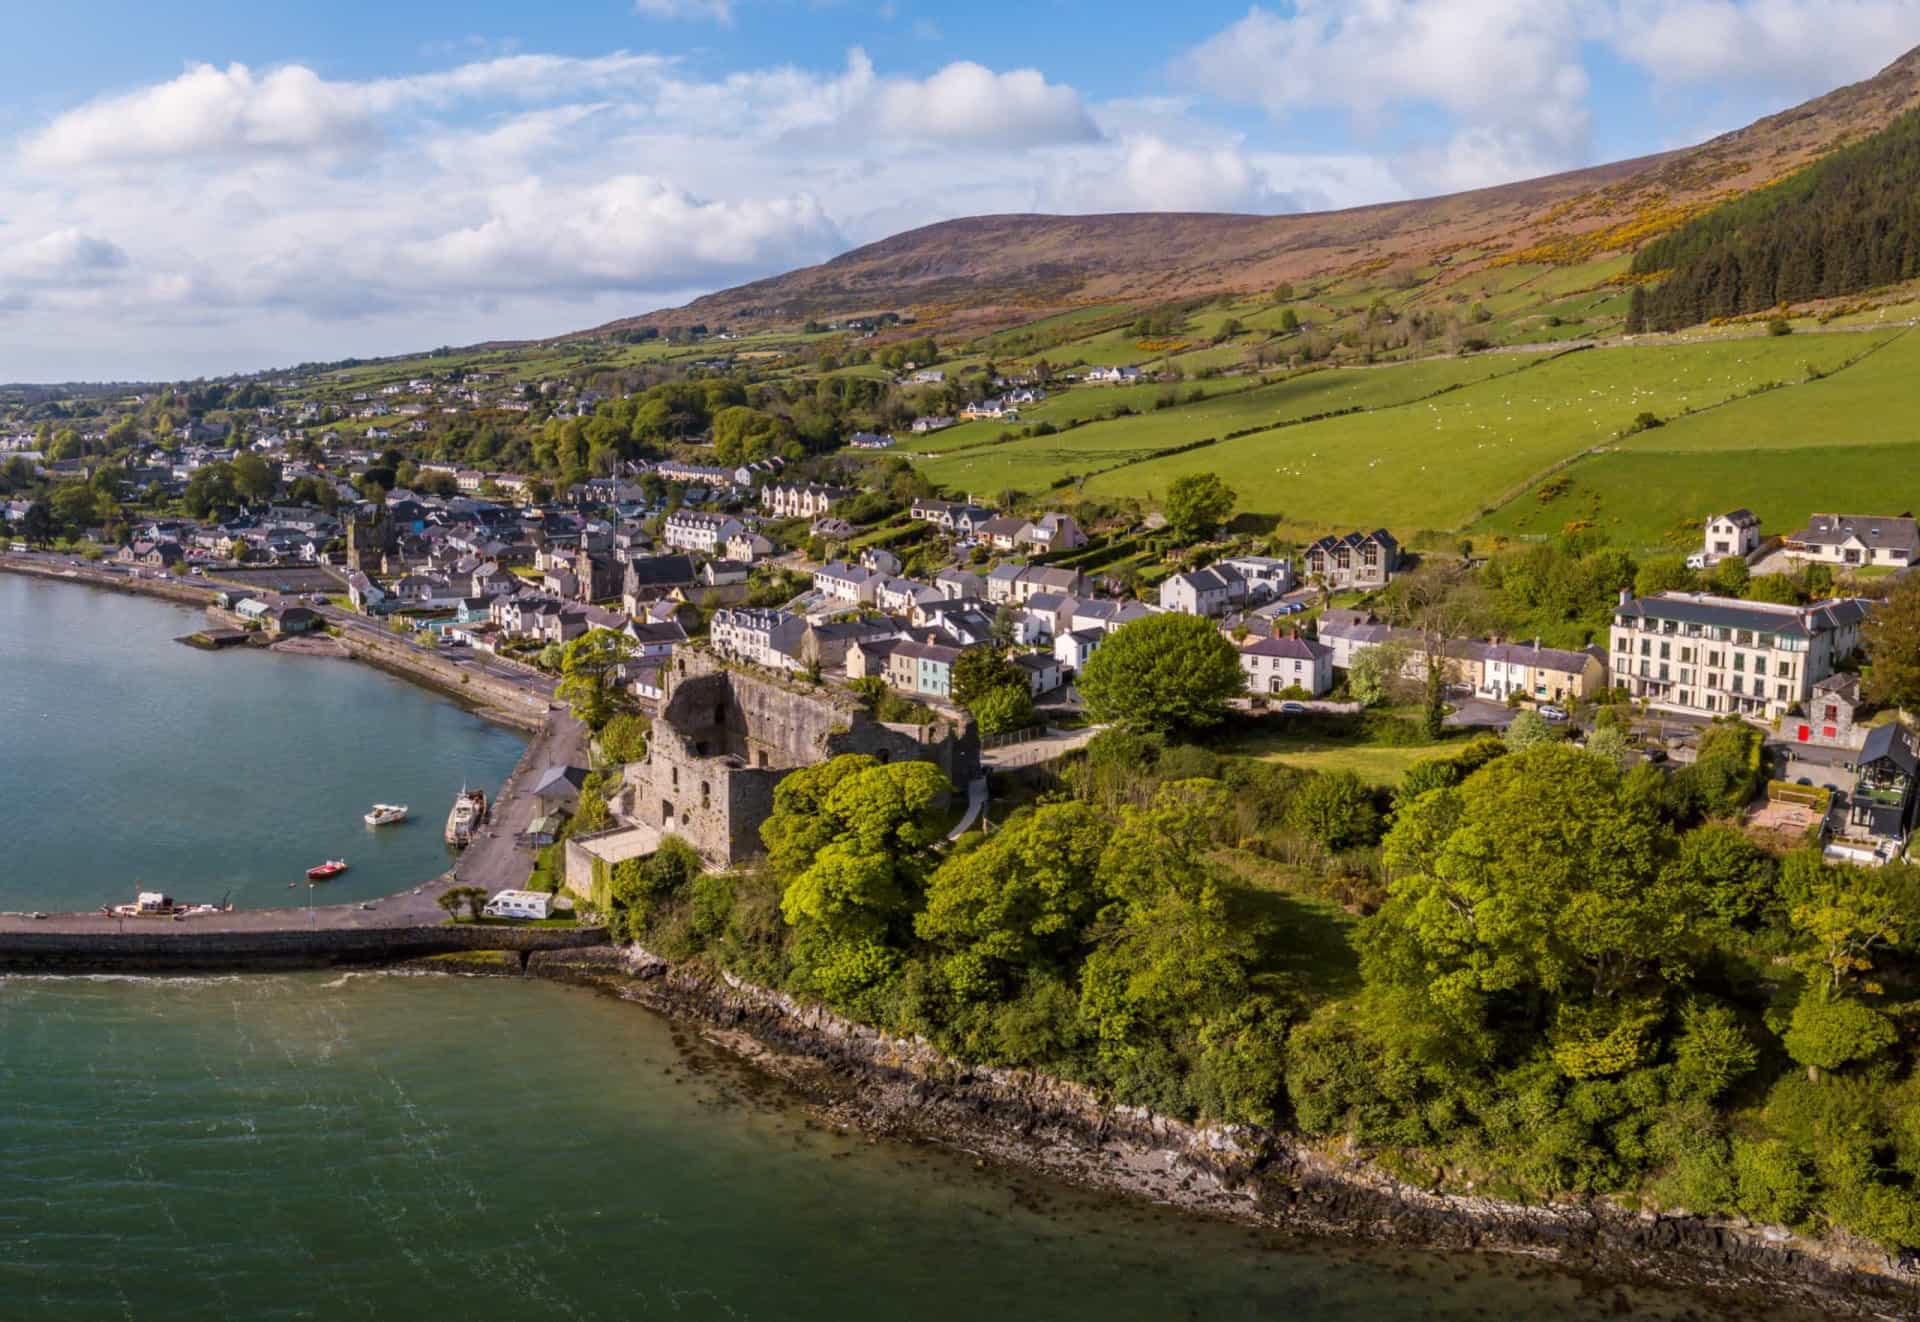 <p>Carlingford sits on the Cooley Peninsula, between the waters of Carlingford Lough and the mountain of Slieve Foye. The coastal town is recognized for its medieval layout, noticeable by the narrow lanes and small streets threading through it center.</p><p>Sources: (<a href="https://www.republicworld.com/entertainment-news/hollywood-news/where-was-the-quiet-man-filmed-here-are-shooting-locations-of-this-50s-classic.html" rel="noopener">Republic Word</a>) (<a href="https://www.history.com/news/remembering-annie-moore-ellis-islands-first-immigrant" rel="noopener">History</a>)</p><p>See also: <a href="https://www.starsinsider.com/celebrity/474993/your-favorite-irish-actors-ever">Your favorite Irish actors ever</a></p>